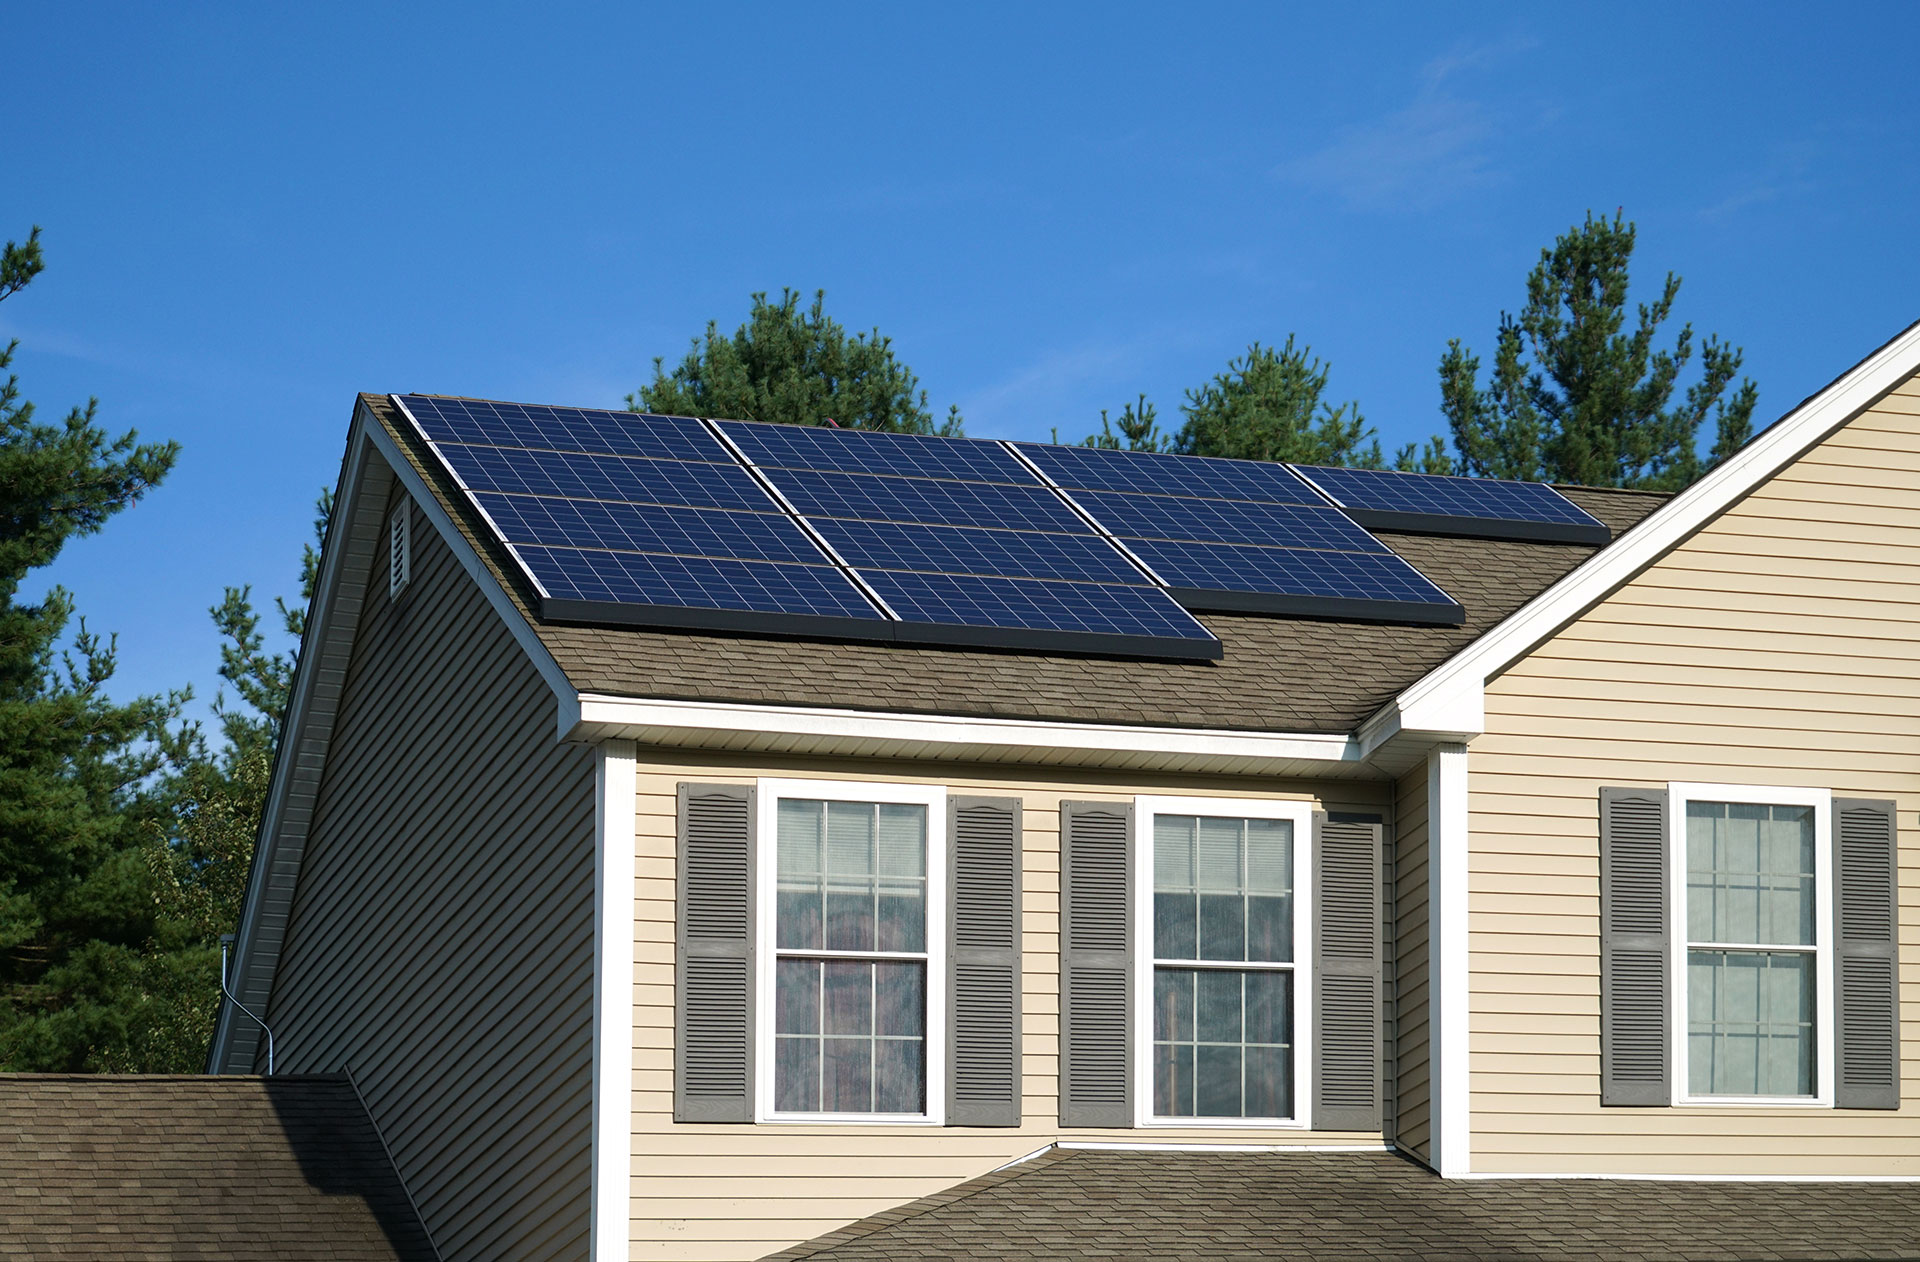 The upper portion of a home with newly installed solar panels on the roof